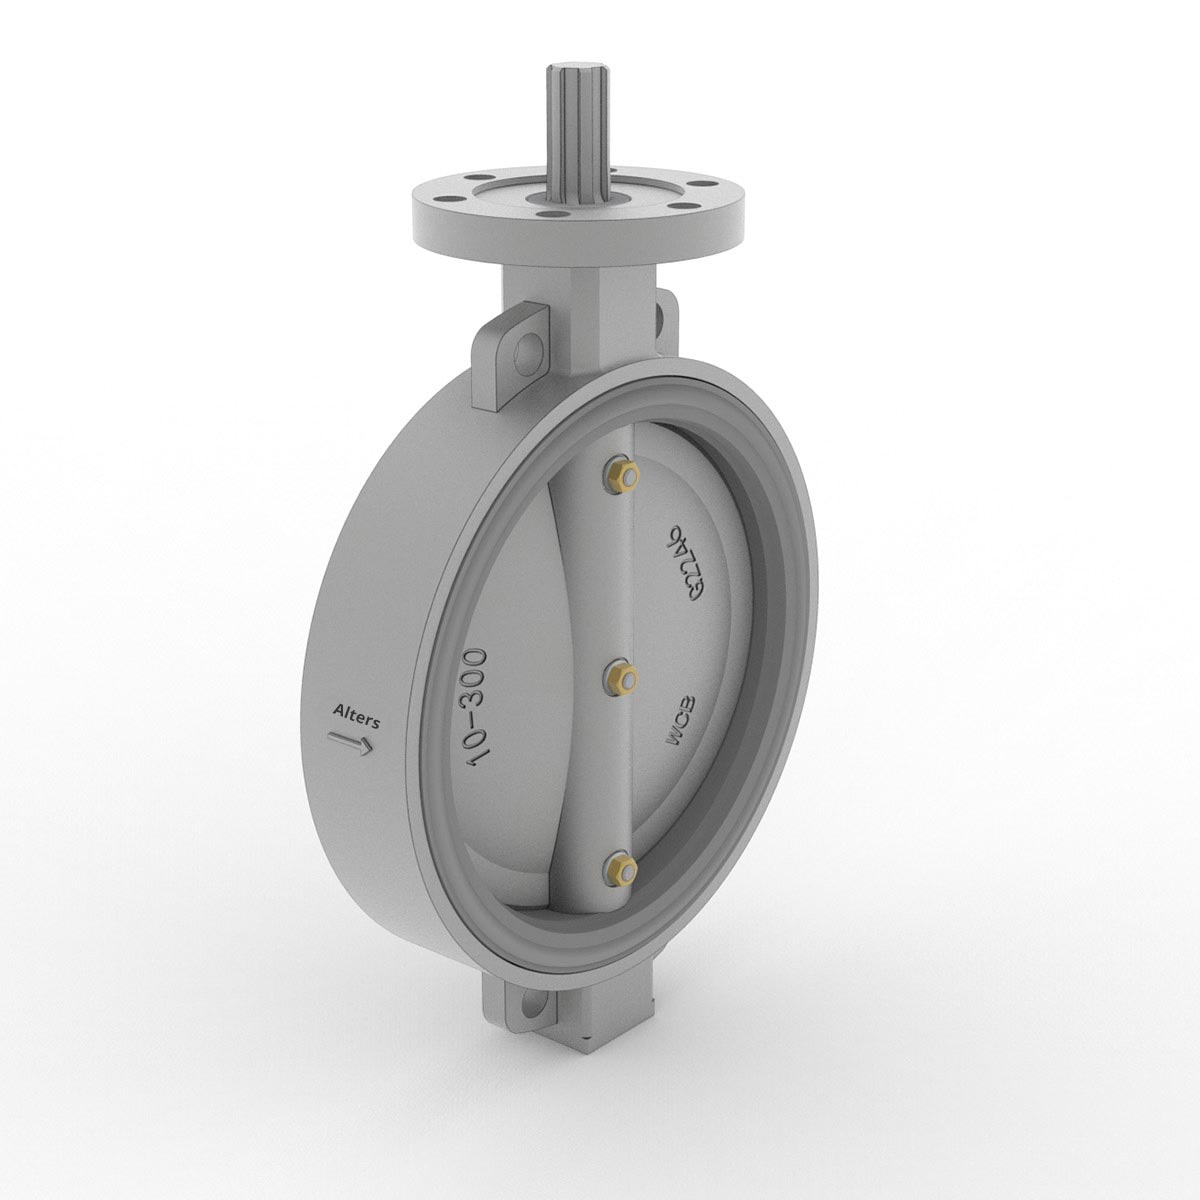 Image of a reliable Concentric Butterfly Valve made of high-quality metal from AlterValve with the company name and specifications.